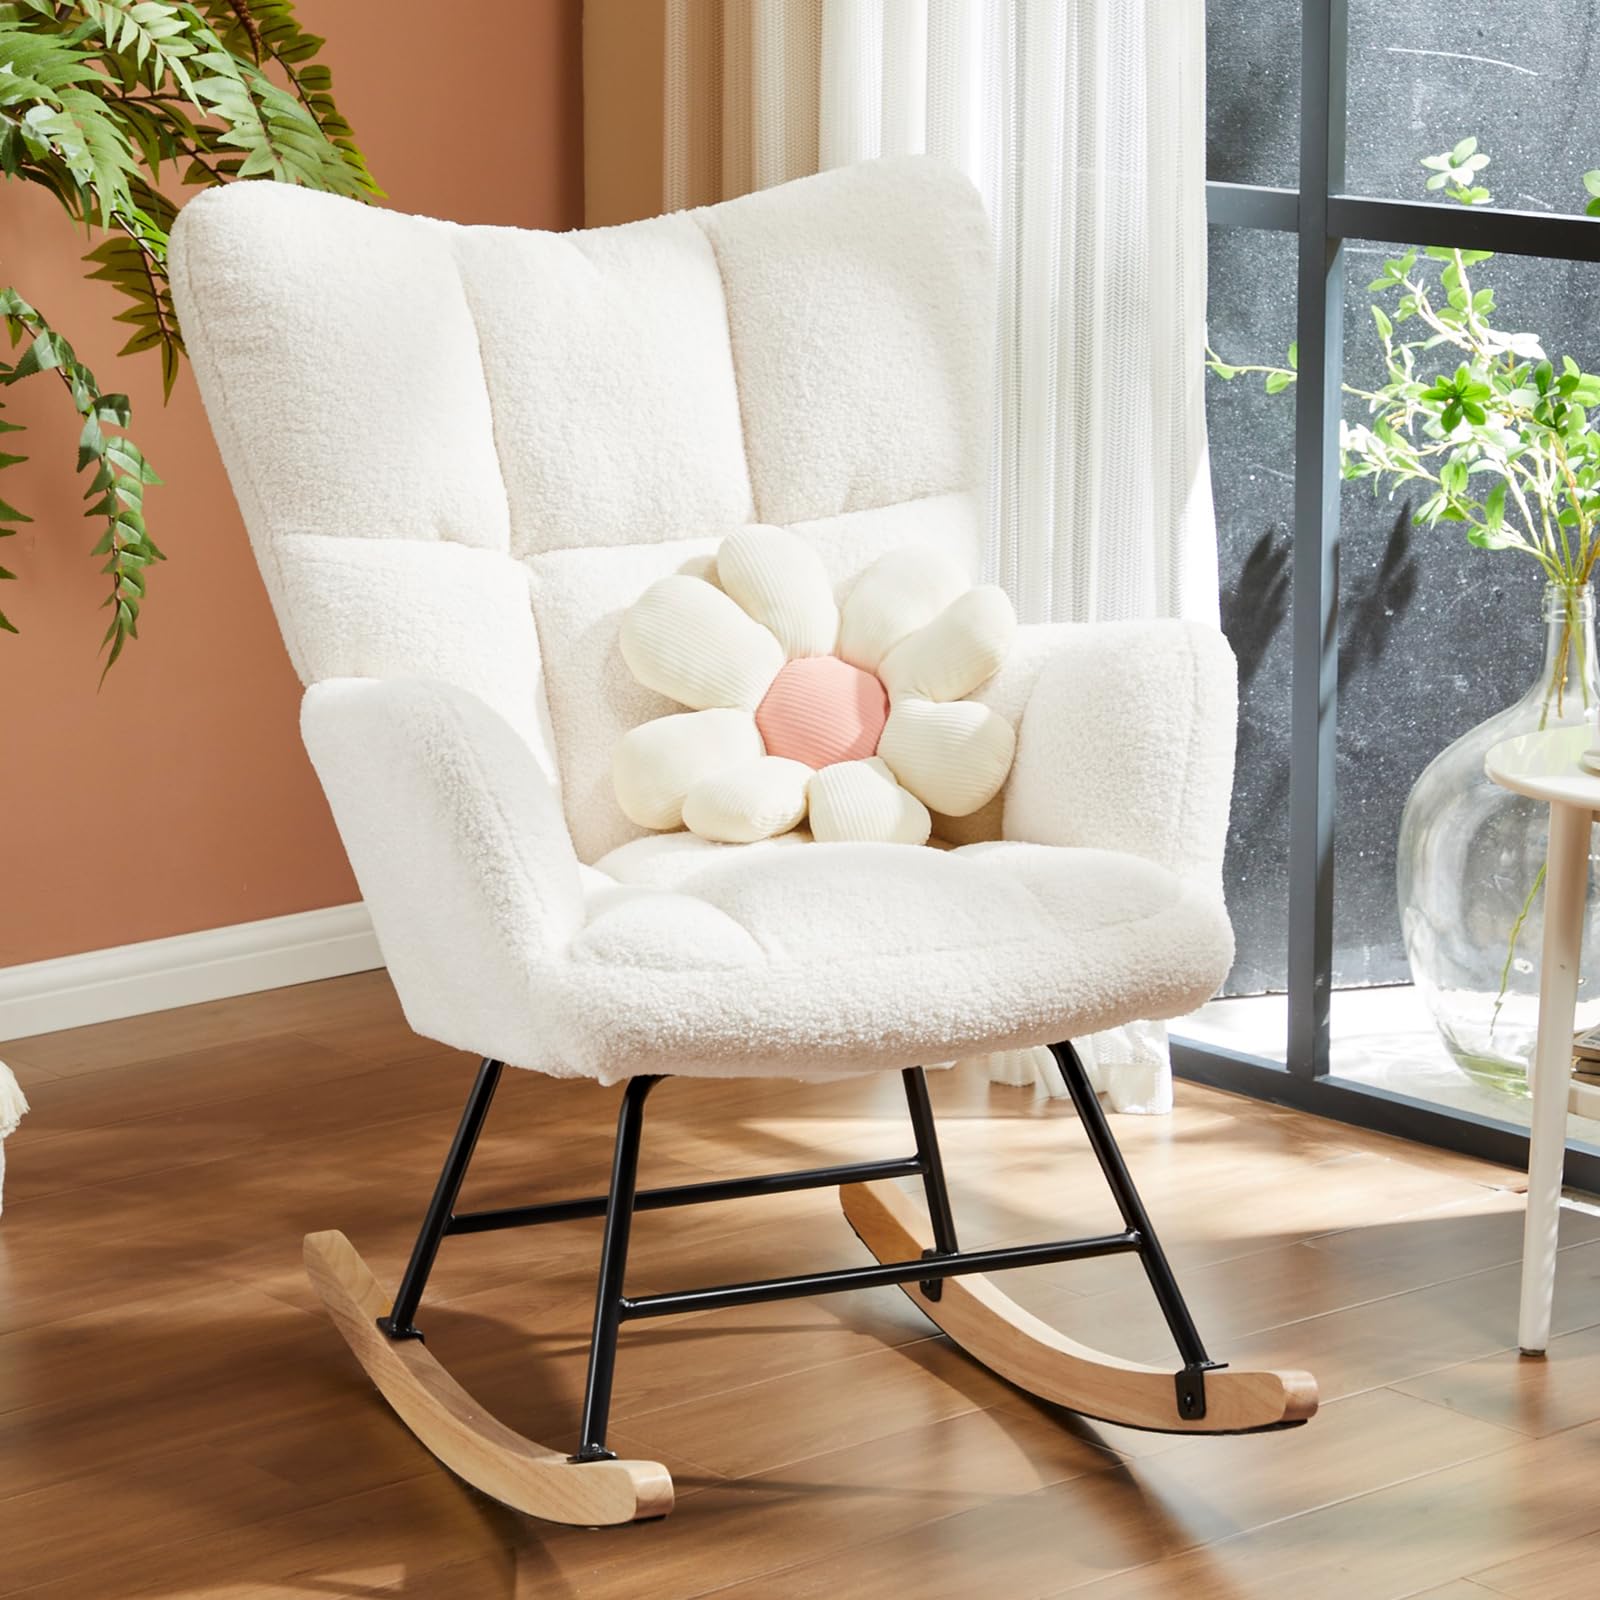 NEWBULIG Nursery Rocking Chair Teddy Upholstered Glider Rocker Chair Nursing Armchair with High Backrest Modern Rocking Accent Chairs for Nursery Bedroom Living Room, Beige